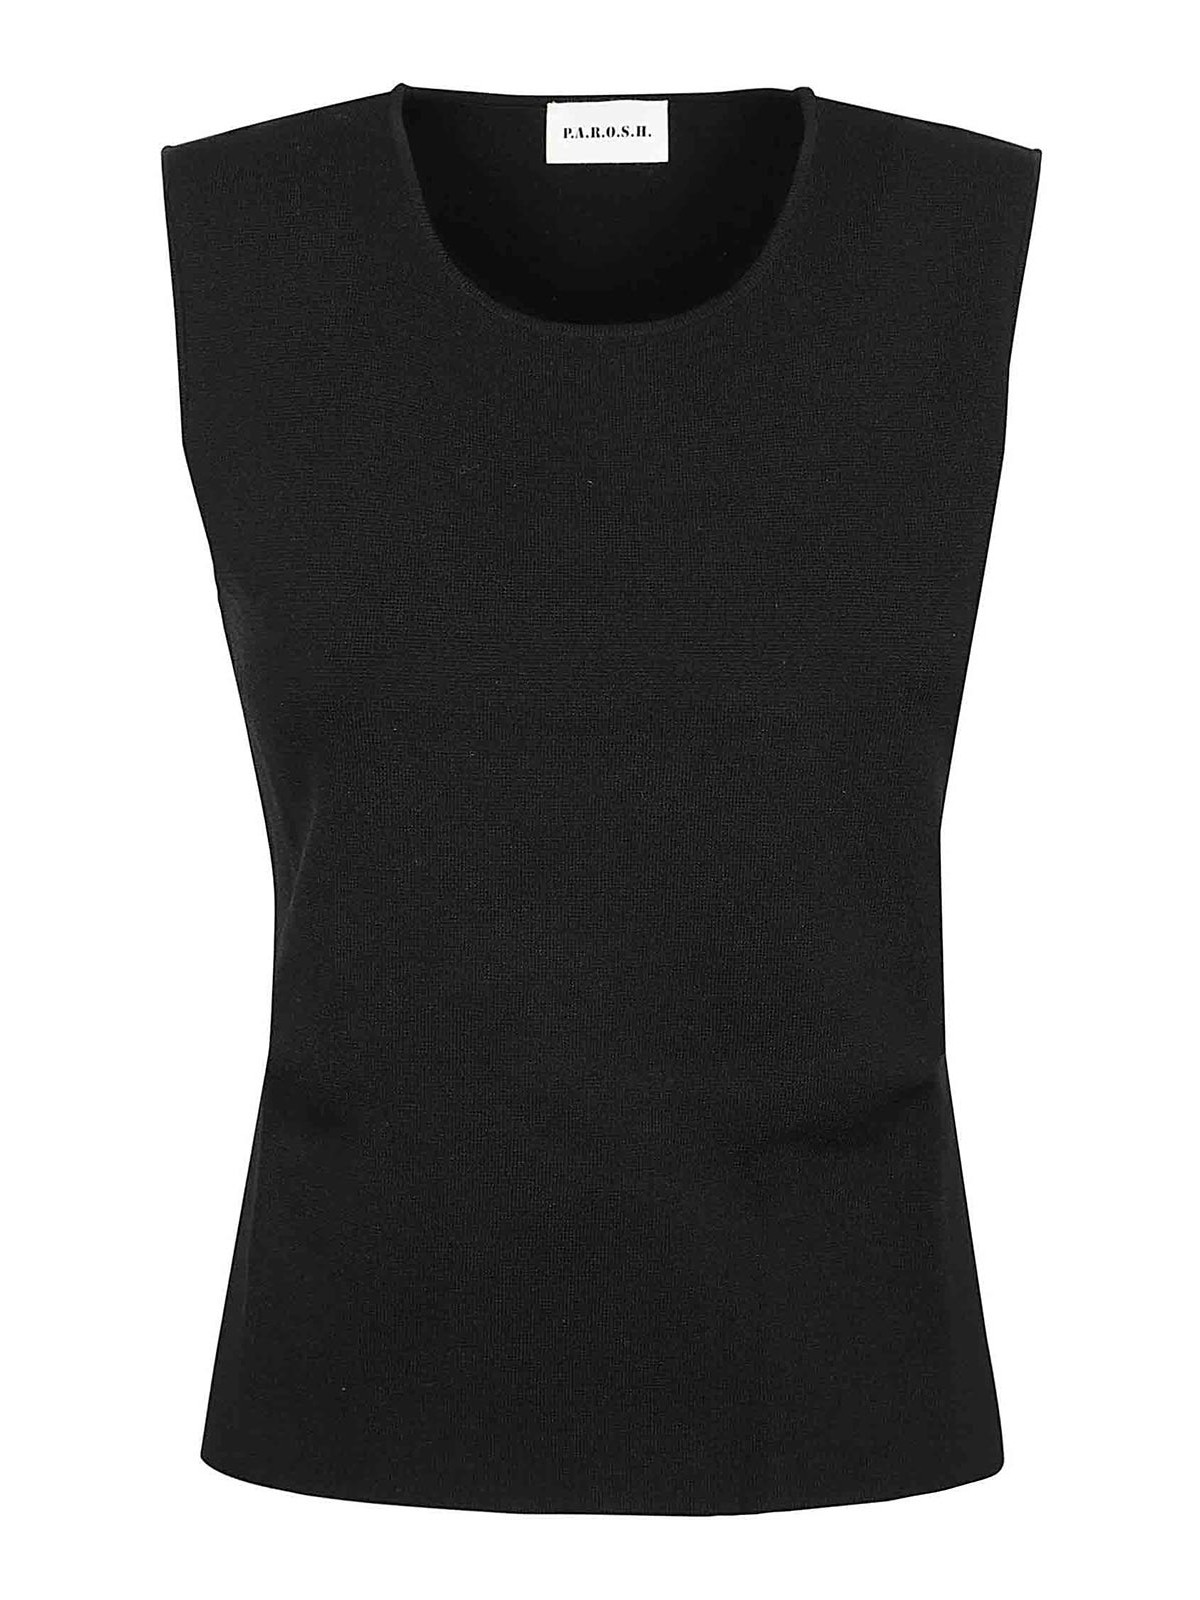 P.a.r.o.s.h Sleeveless Top In Black